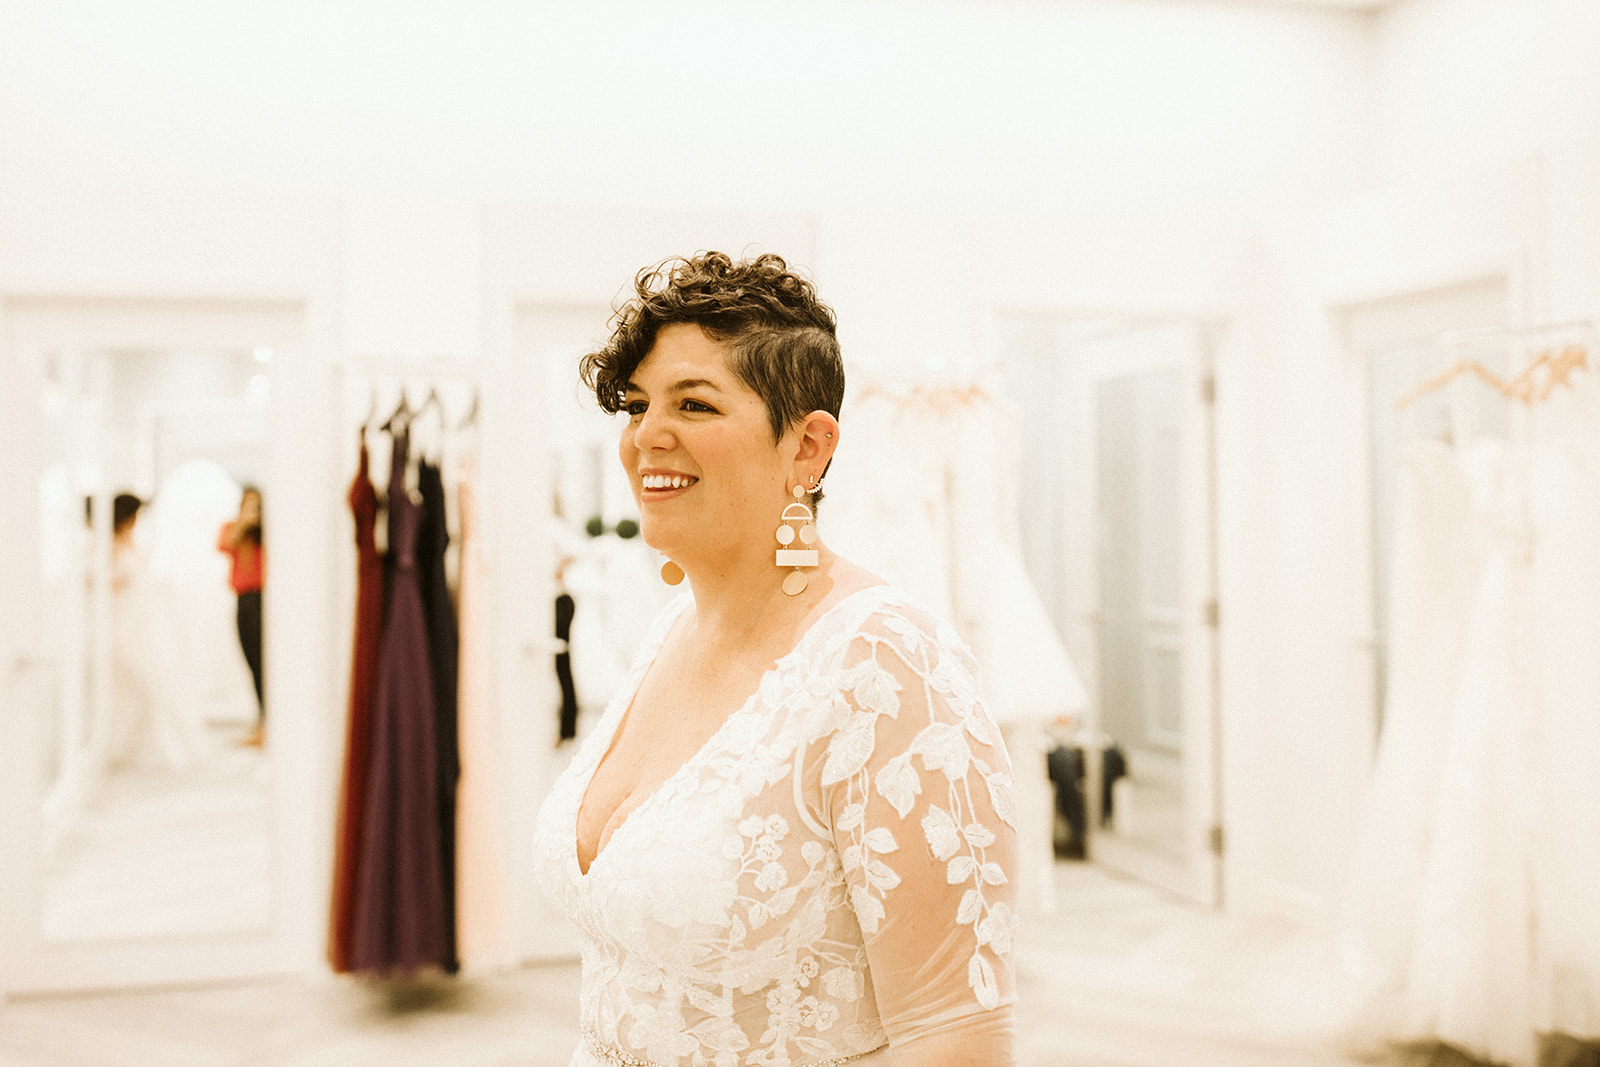 A woman with short brown hair smiles as she tries on a lace wedding dress at David's Bridal